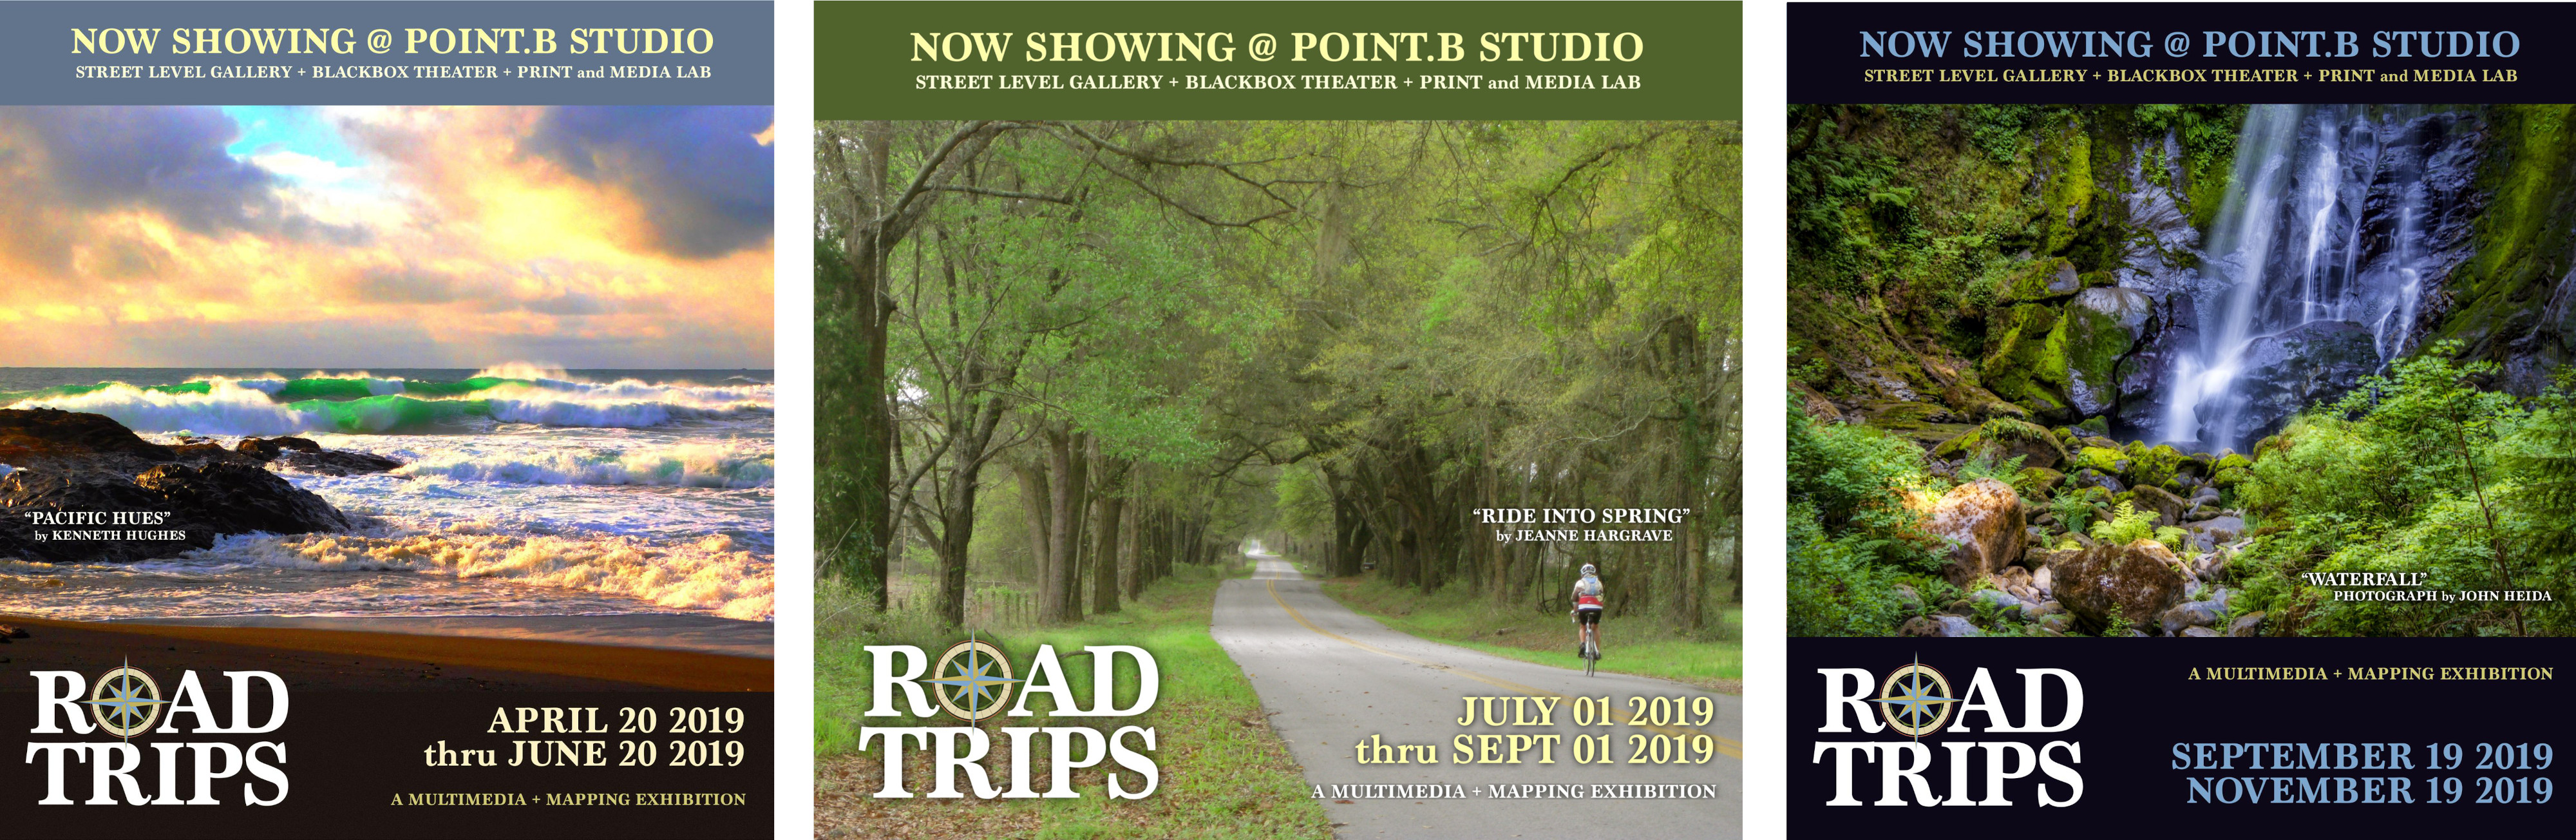 ROAD TRIPS - Episodes 3, 4 and 5